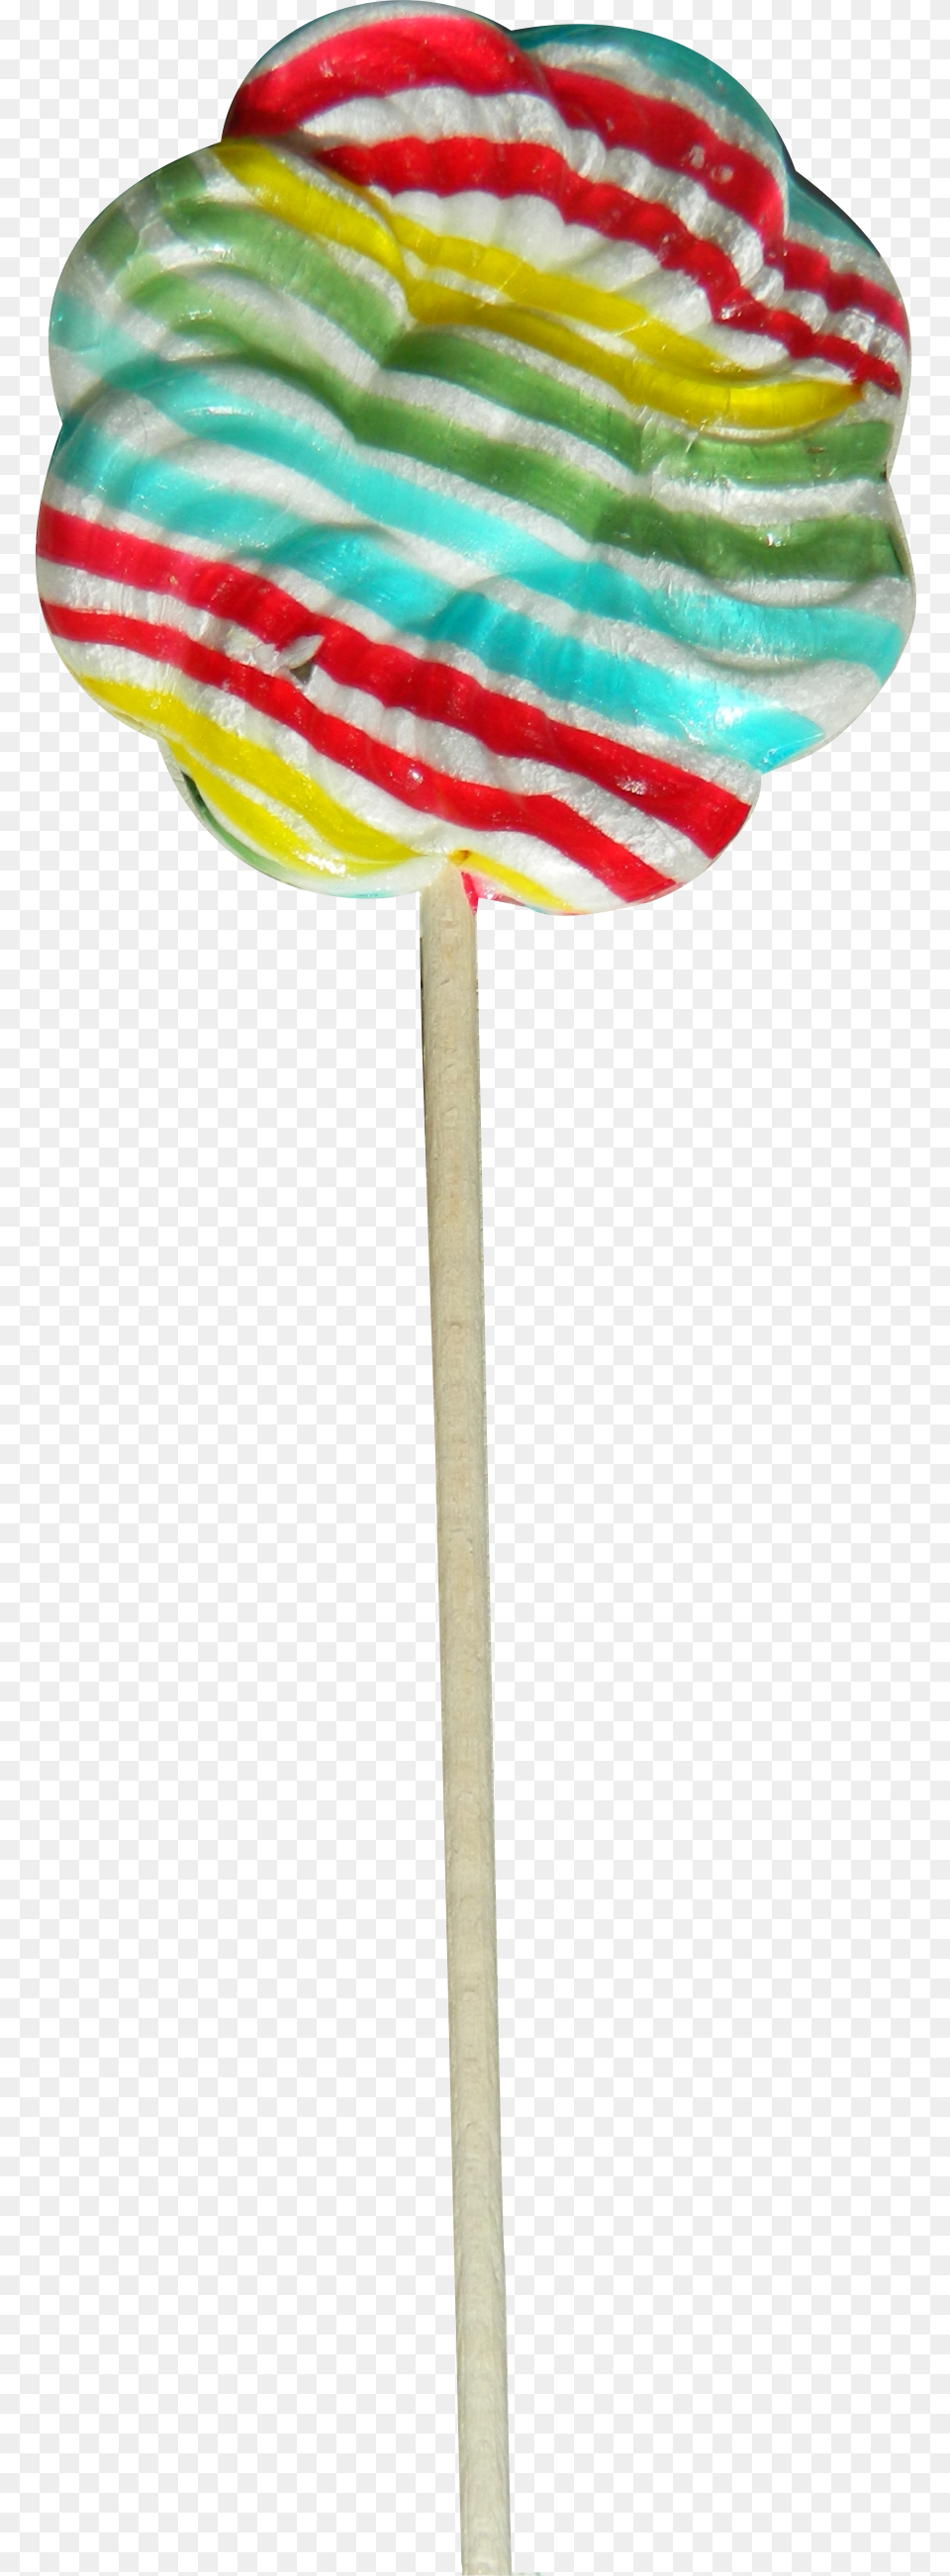 Candy Cane Lollipop Lollies Lutscher Lizalice Fish, Food, Sweets Png